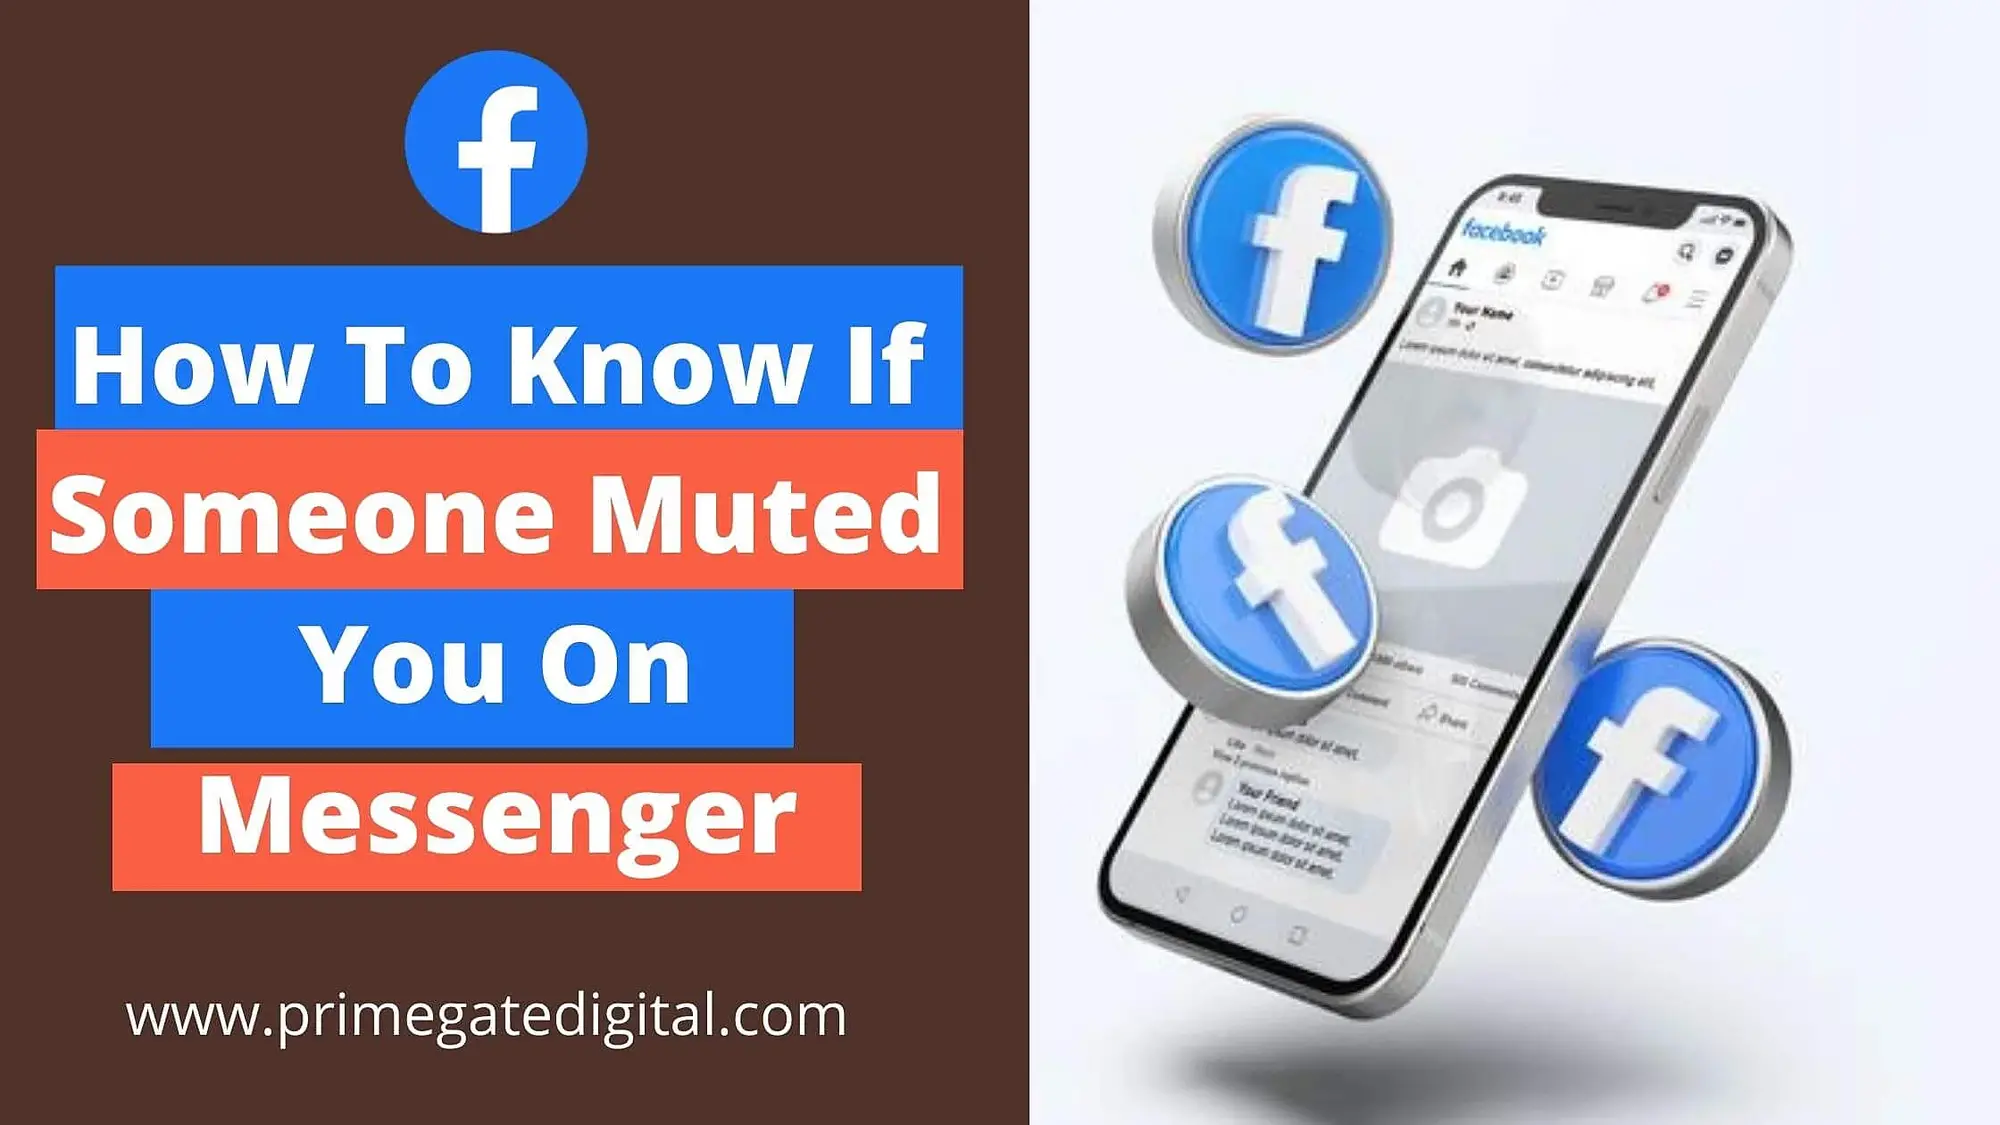 How To Know If Someone Muted You On Messenger